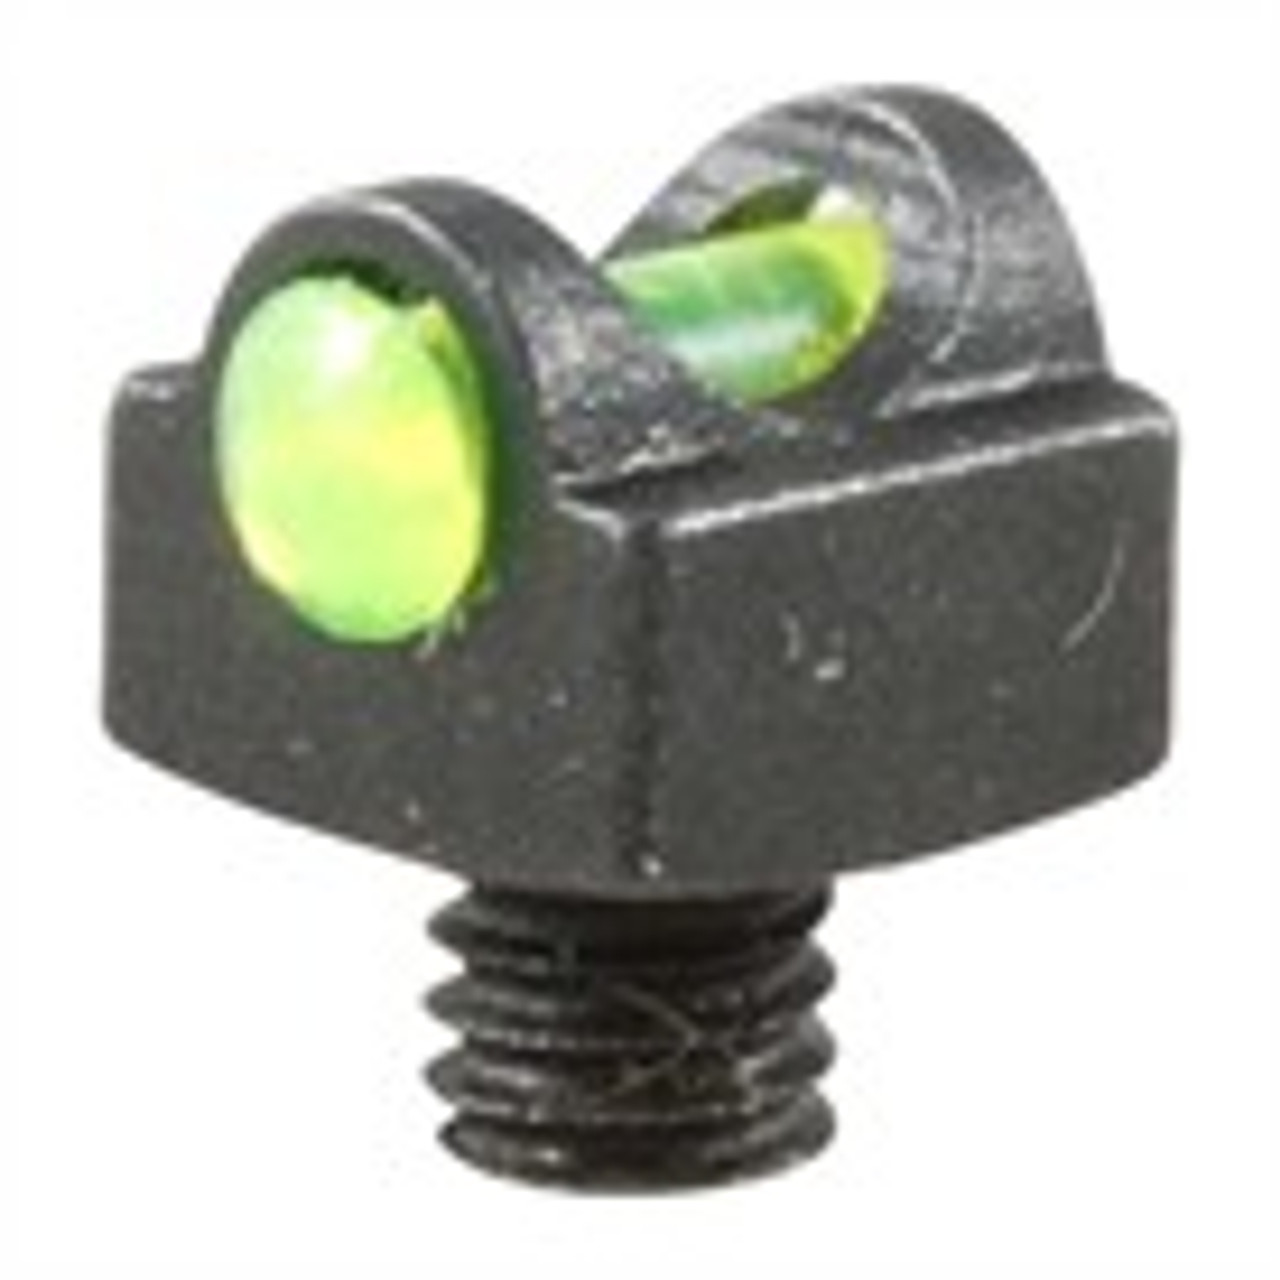 STARBRITE DELUX 3-56 GRN

Bright fiber optic bead sight. Metal housing. Our smallest diameter bead replacement. CNC machined. Fiber diameter is .060 inch. Fiber length is 0.25 inch.